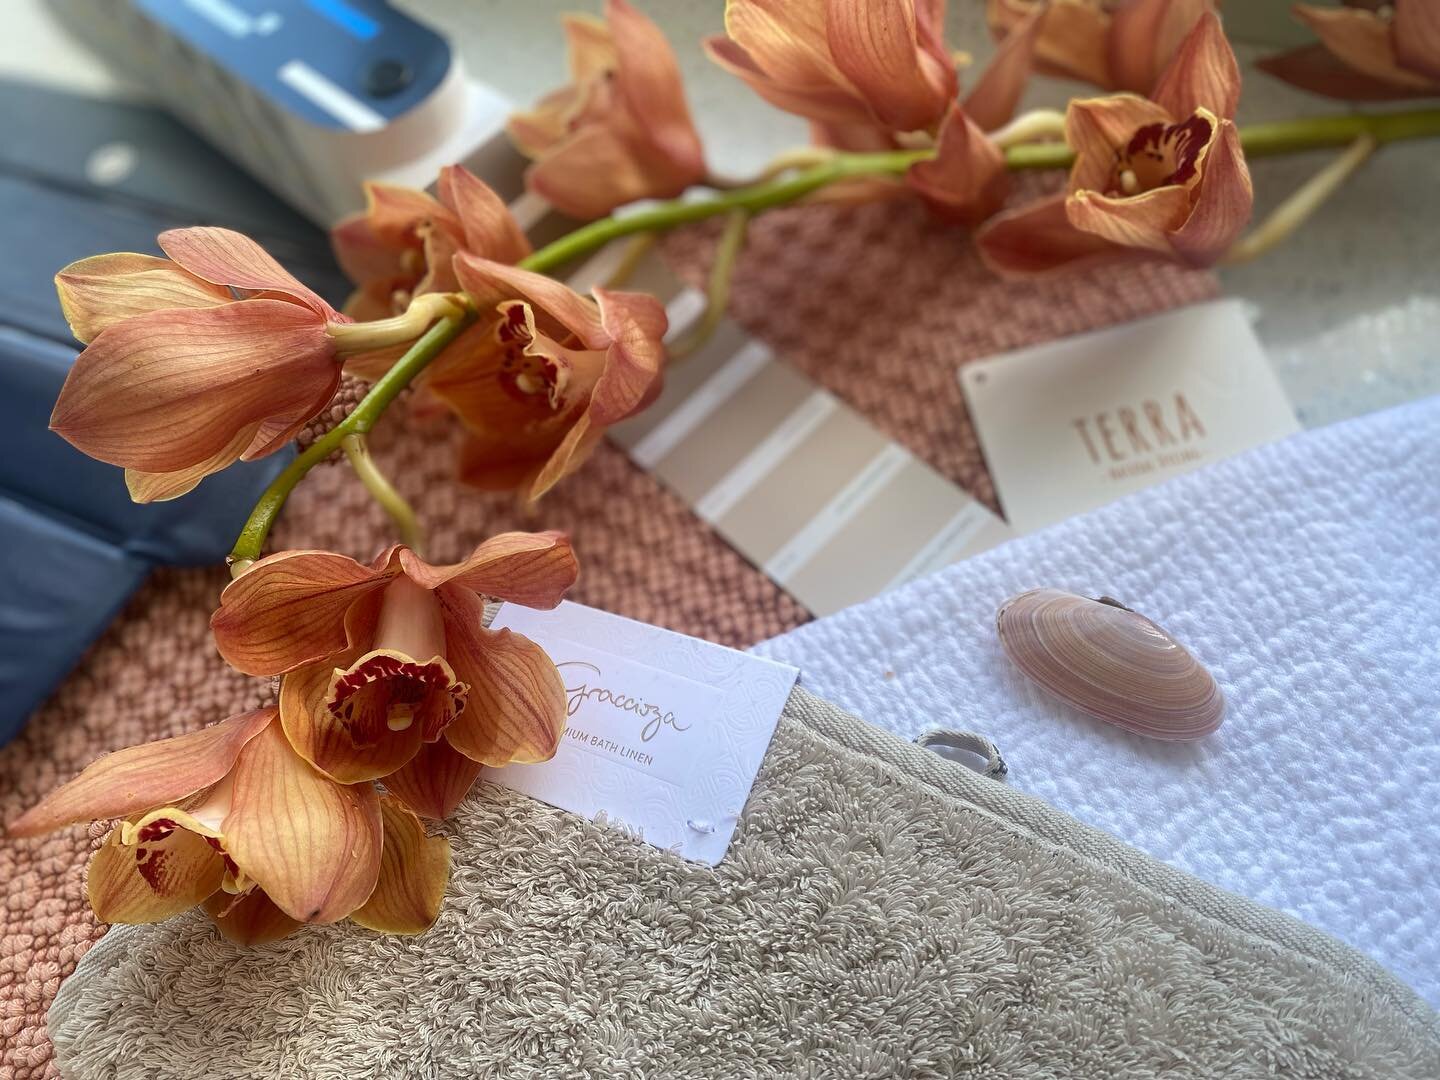 Looking at some beautiful crisp luxurious bath and bed linen for my lovely client making sure it becomes an elegant timeless design scheme adding to the wellness feel that a bathroom and bedroom should have 💫 Lasting forever as it&rsquo;s all made f